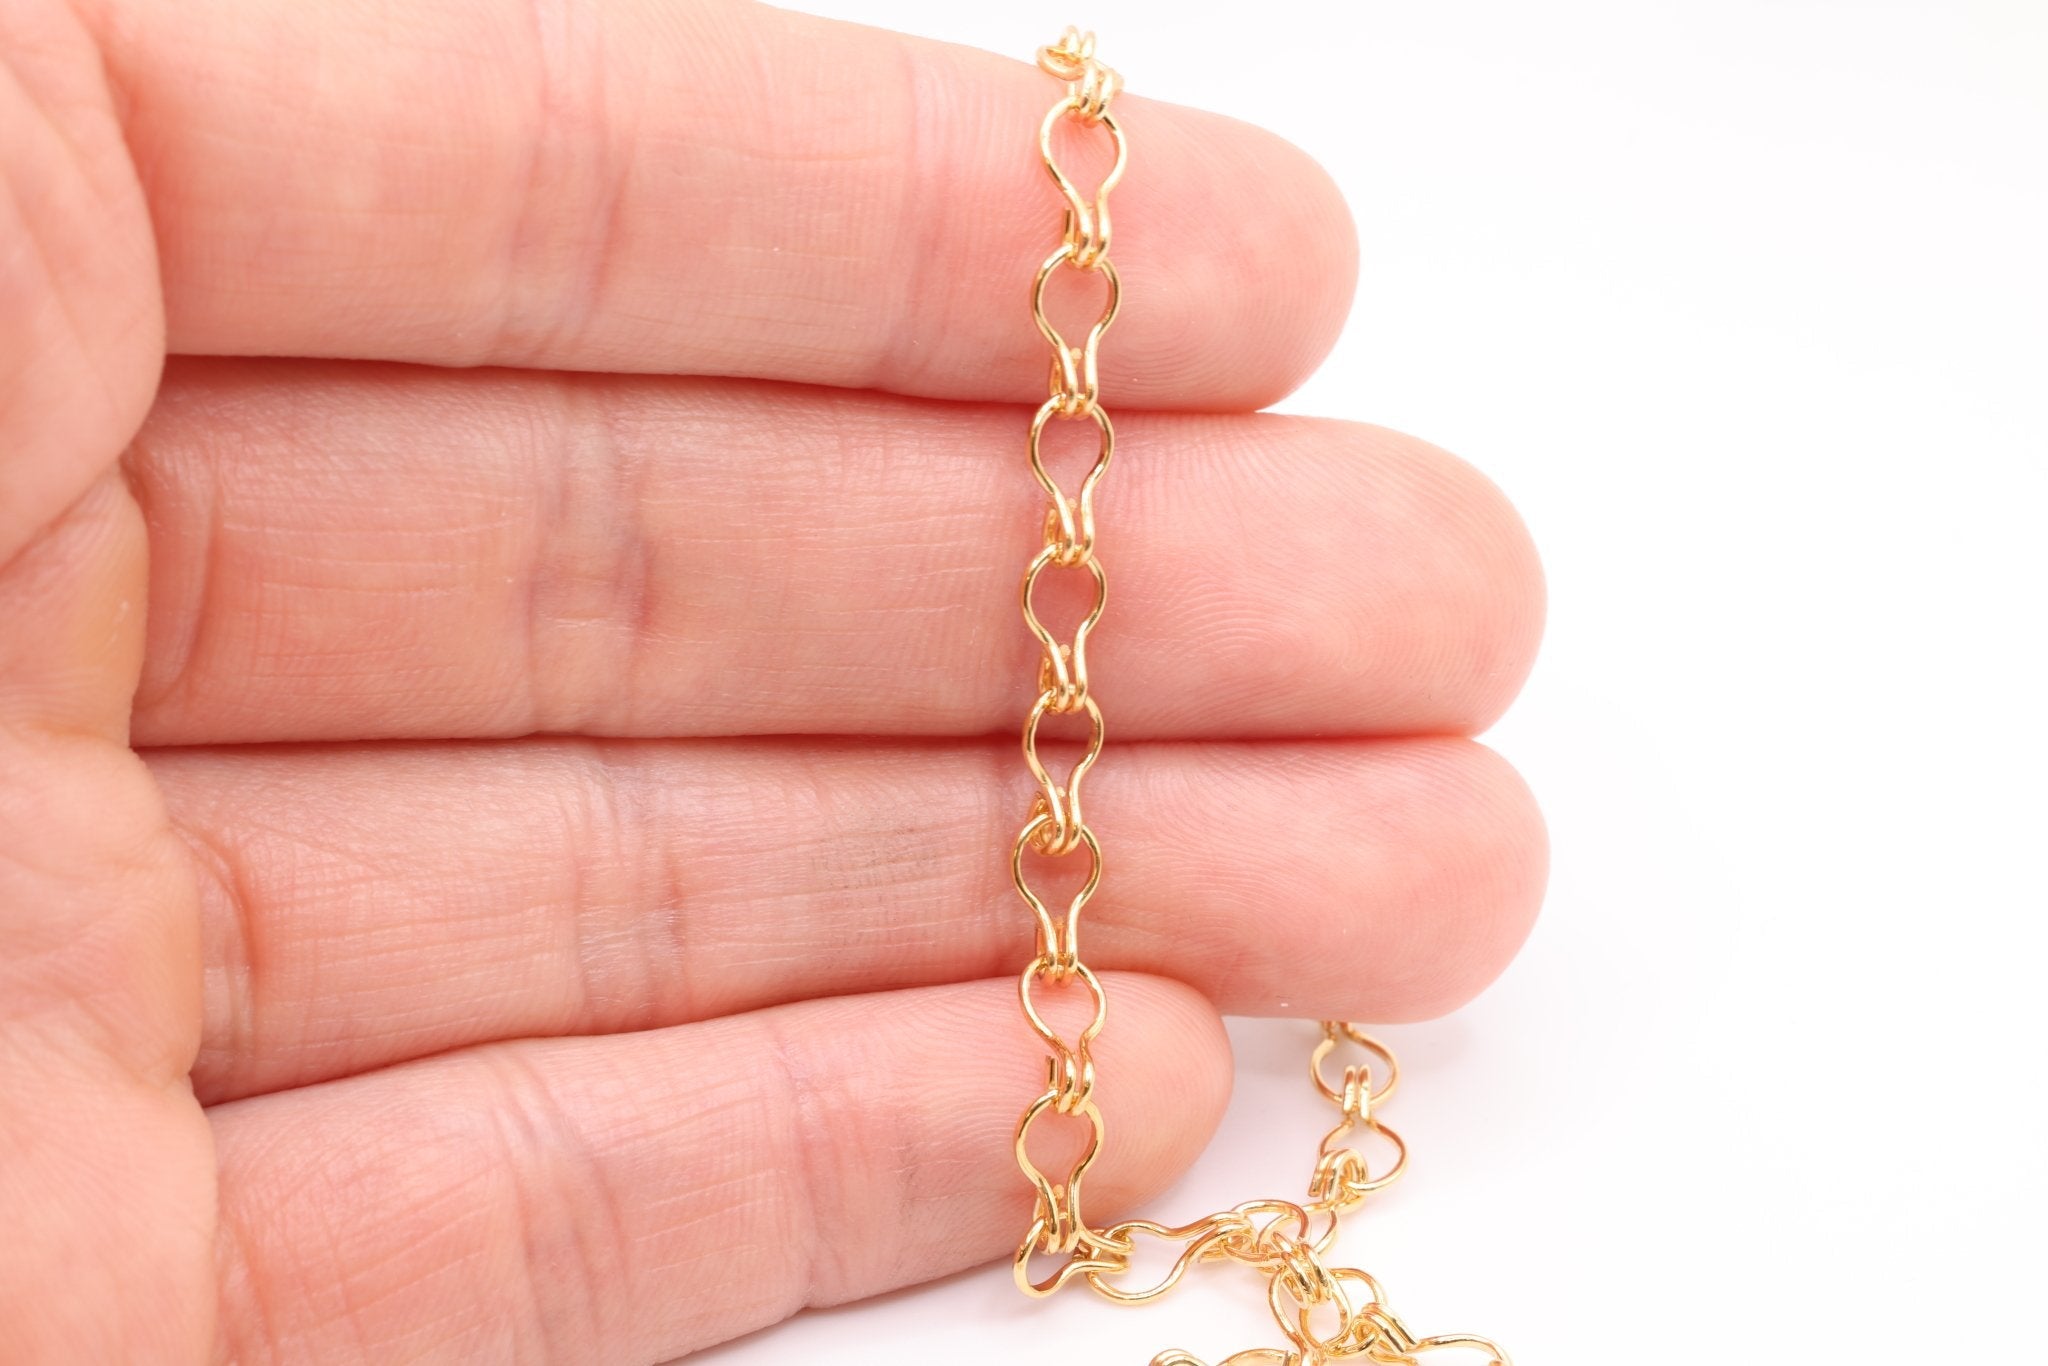 5mm Ladder Chain, 14K Gold-Filled, Pay Per Foot, Jewelry Making Chain - HarperCrown